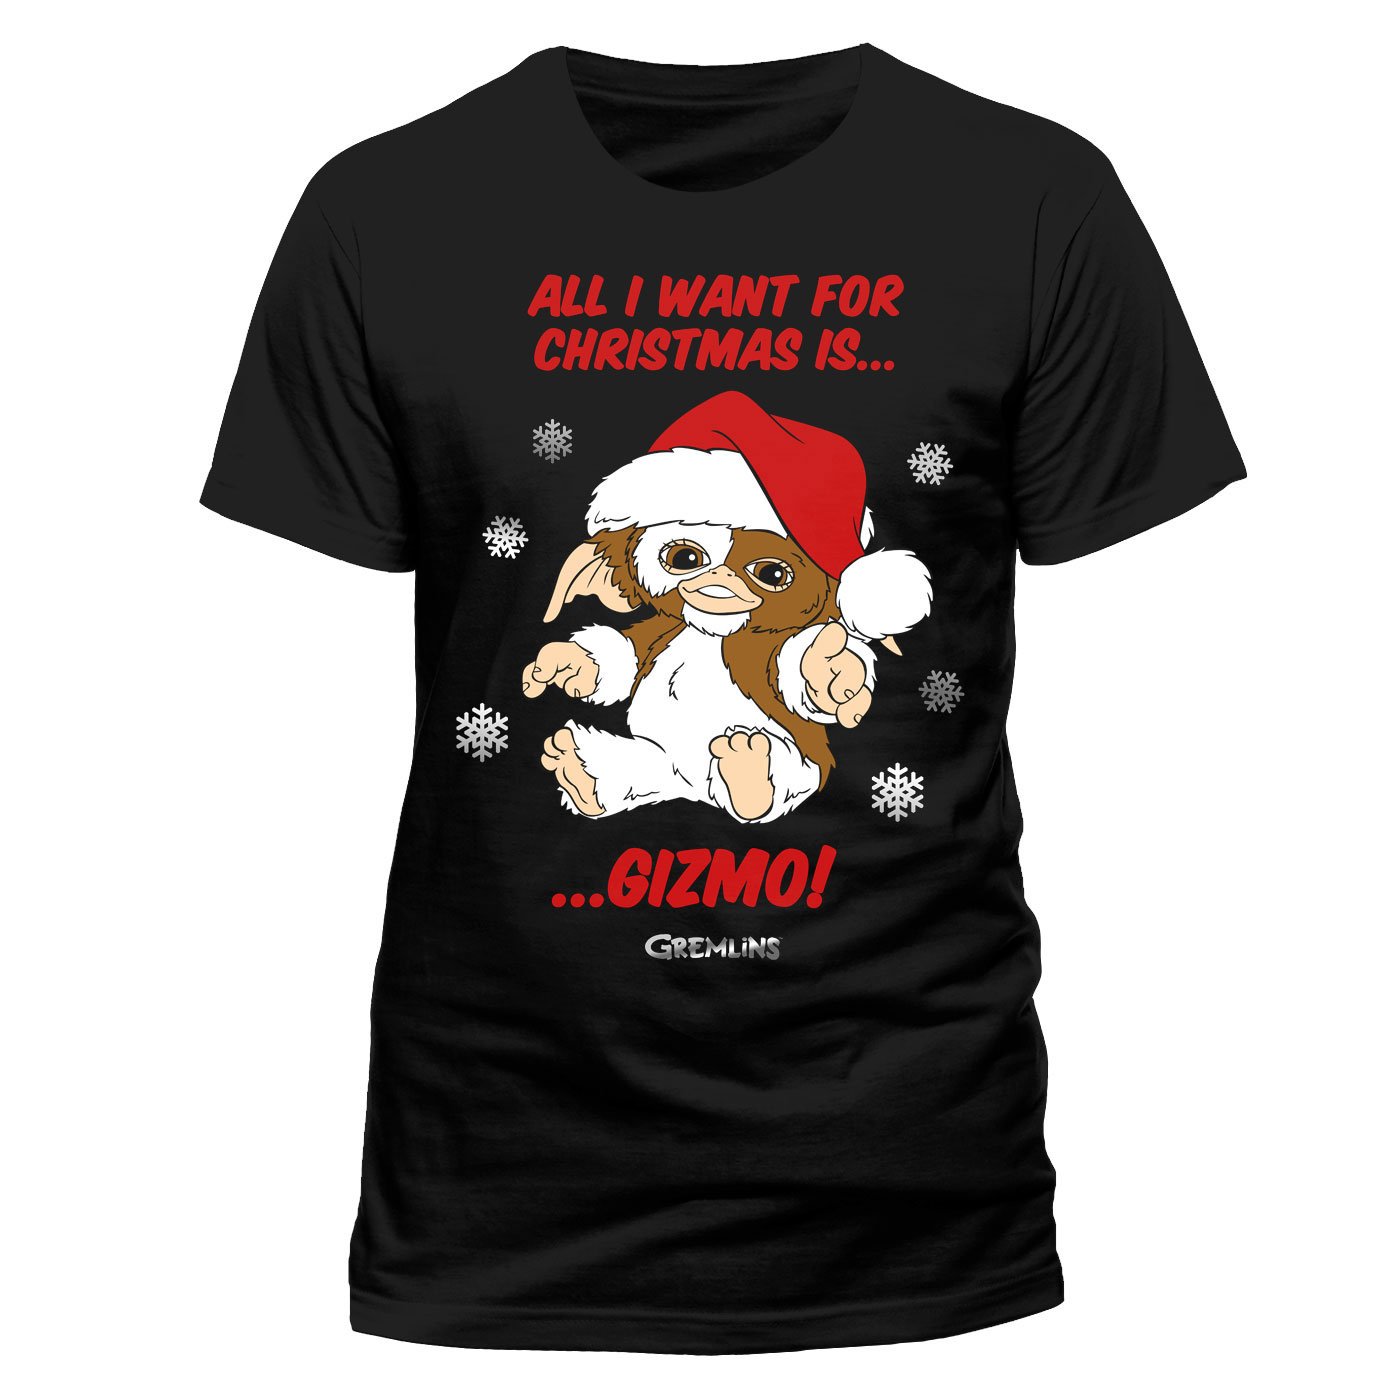 Gremlins T-Shirt All I Want Is Gizmo (L)